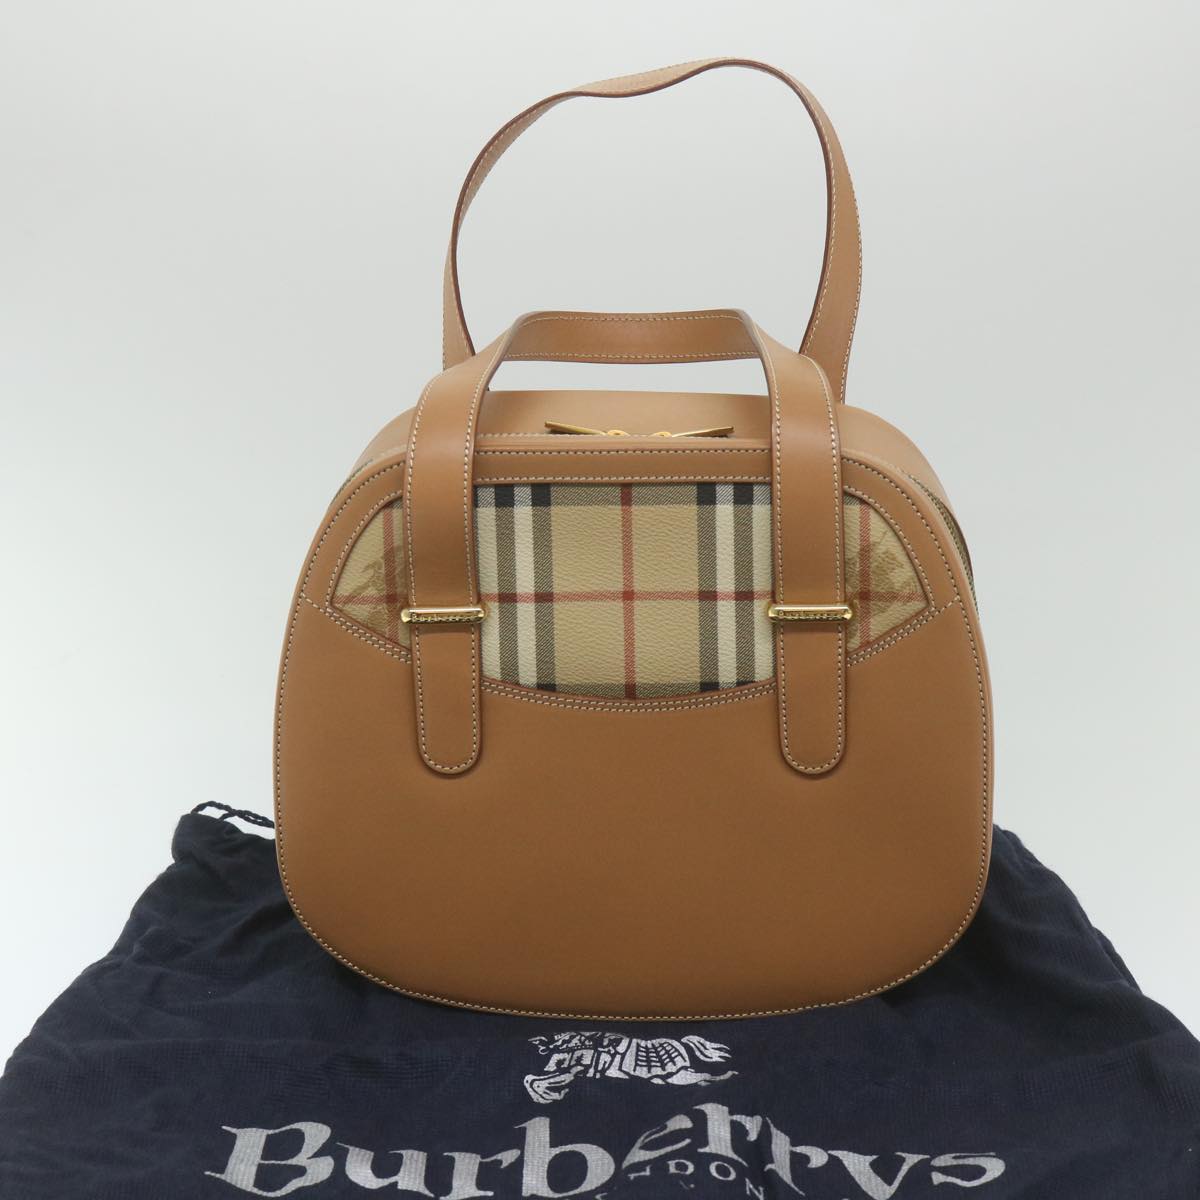 Burberrys Hand Bag Leather Beige Auth 59466